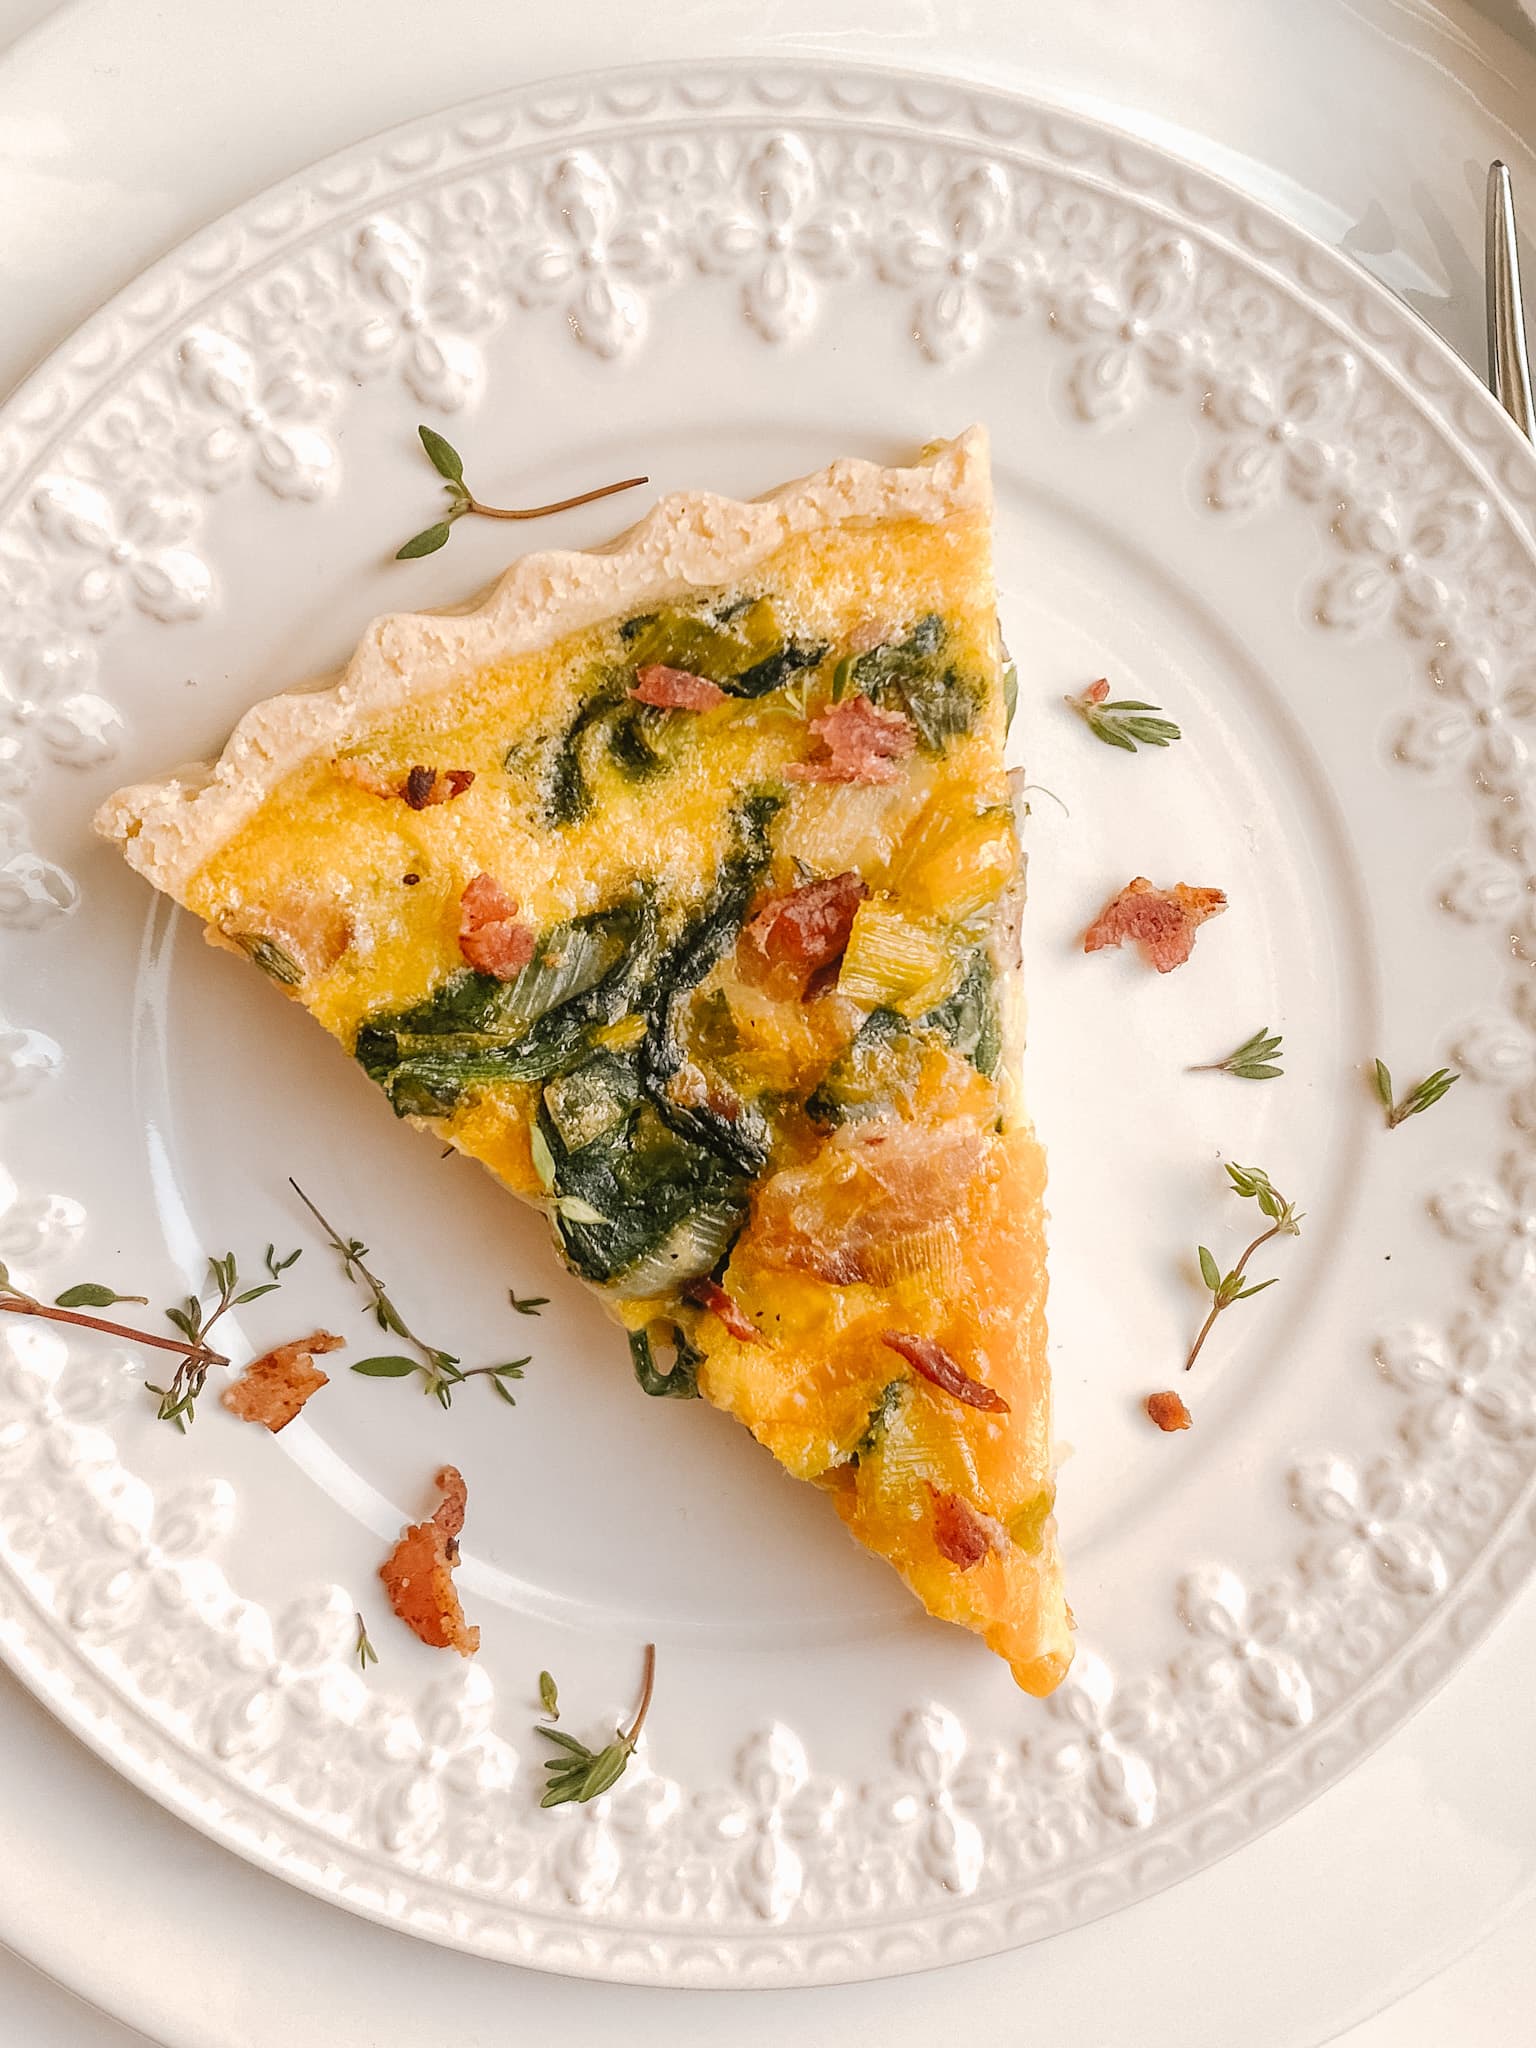 zoomed in shot of gluten-free quiche on a white decorative plate, spinach and bacon can be seen clearly